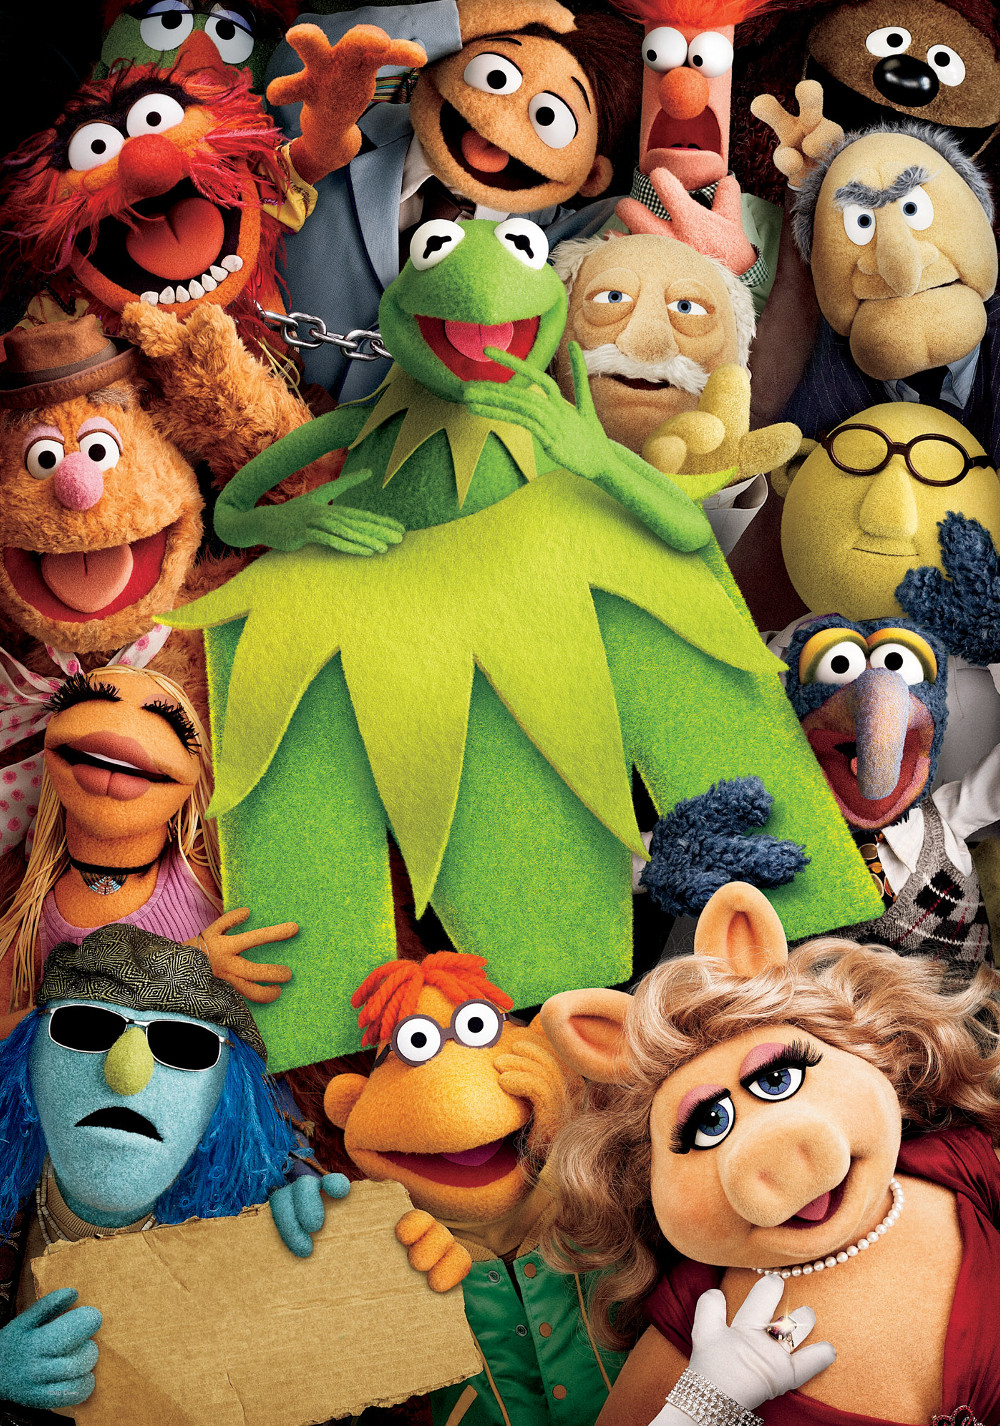 The Muppets Images. 